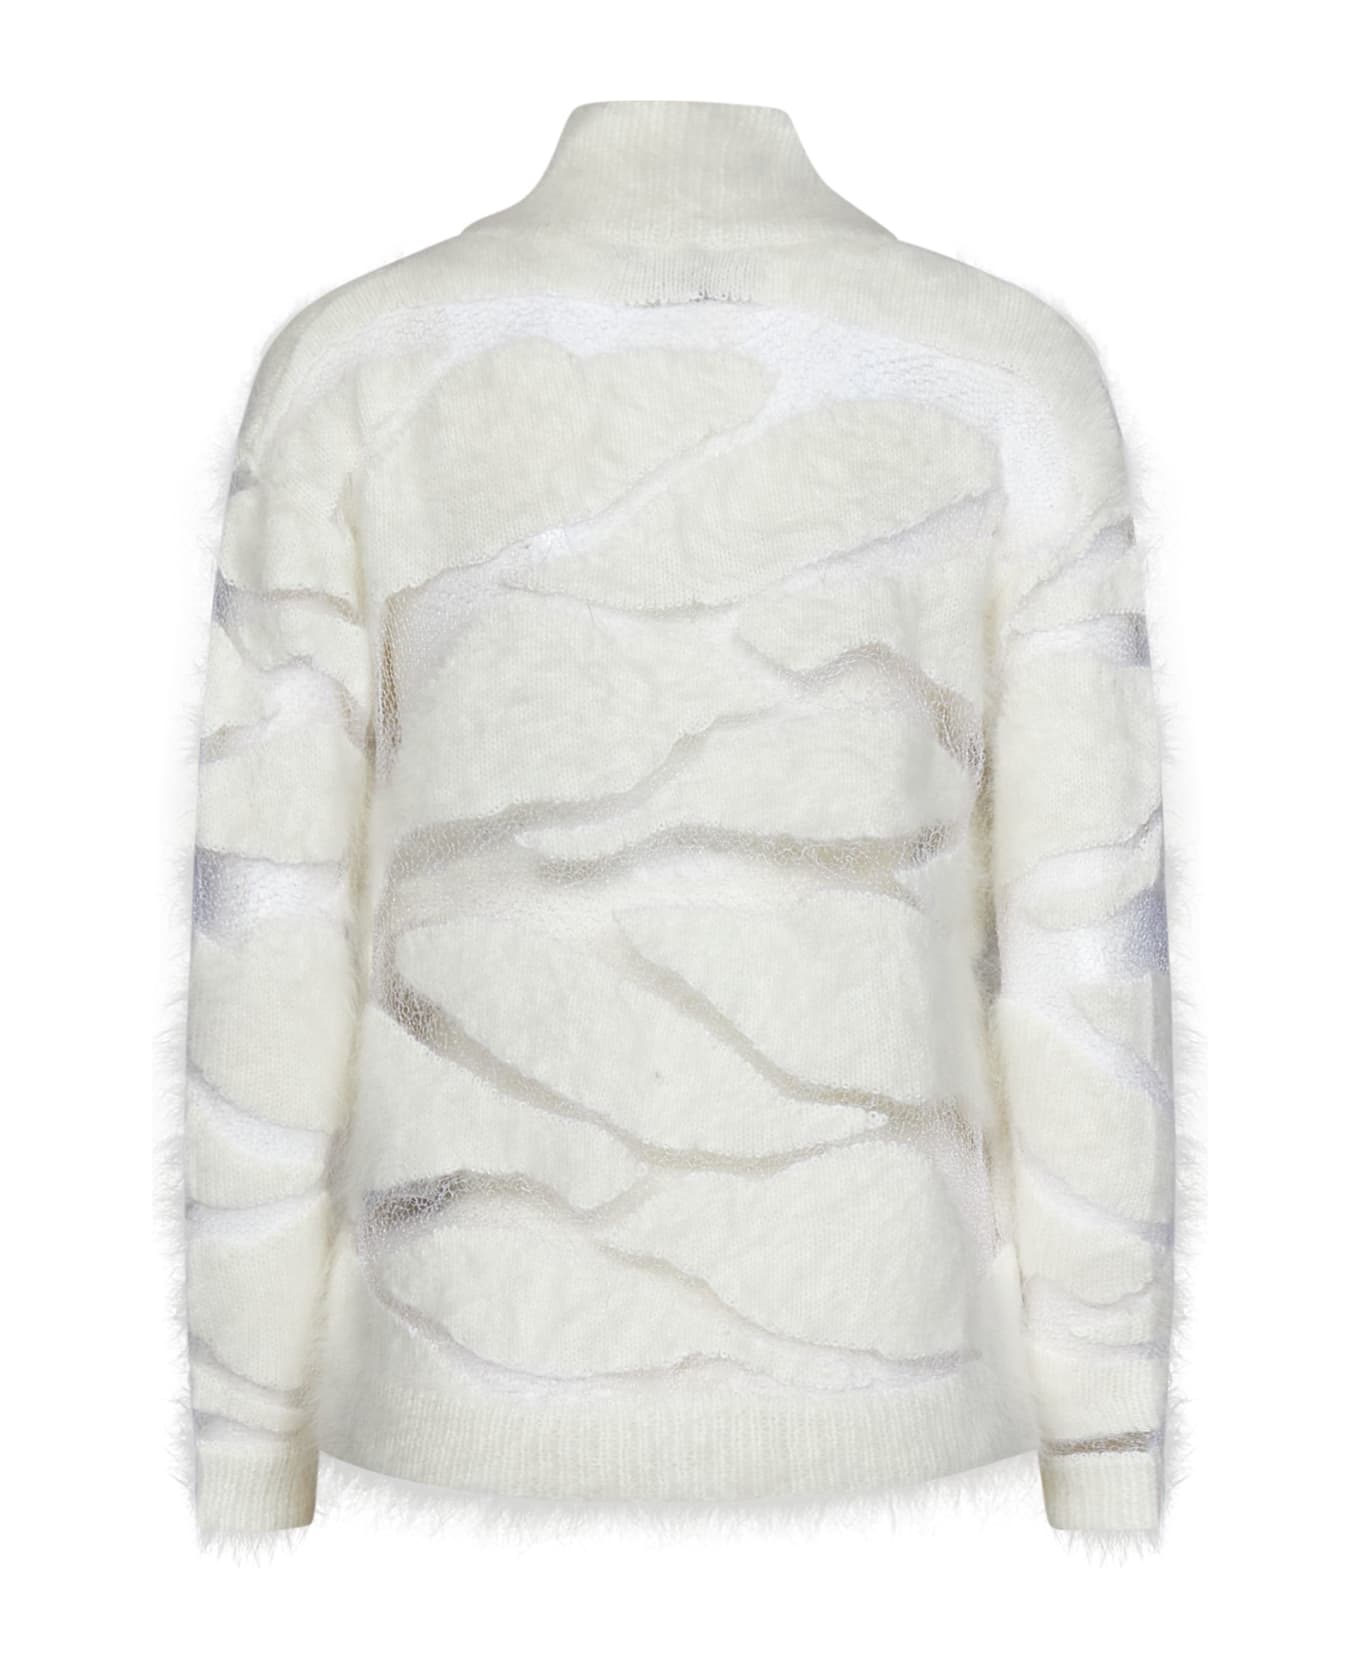 Tom Ford Sweater - IVORY